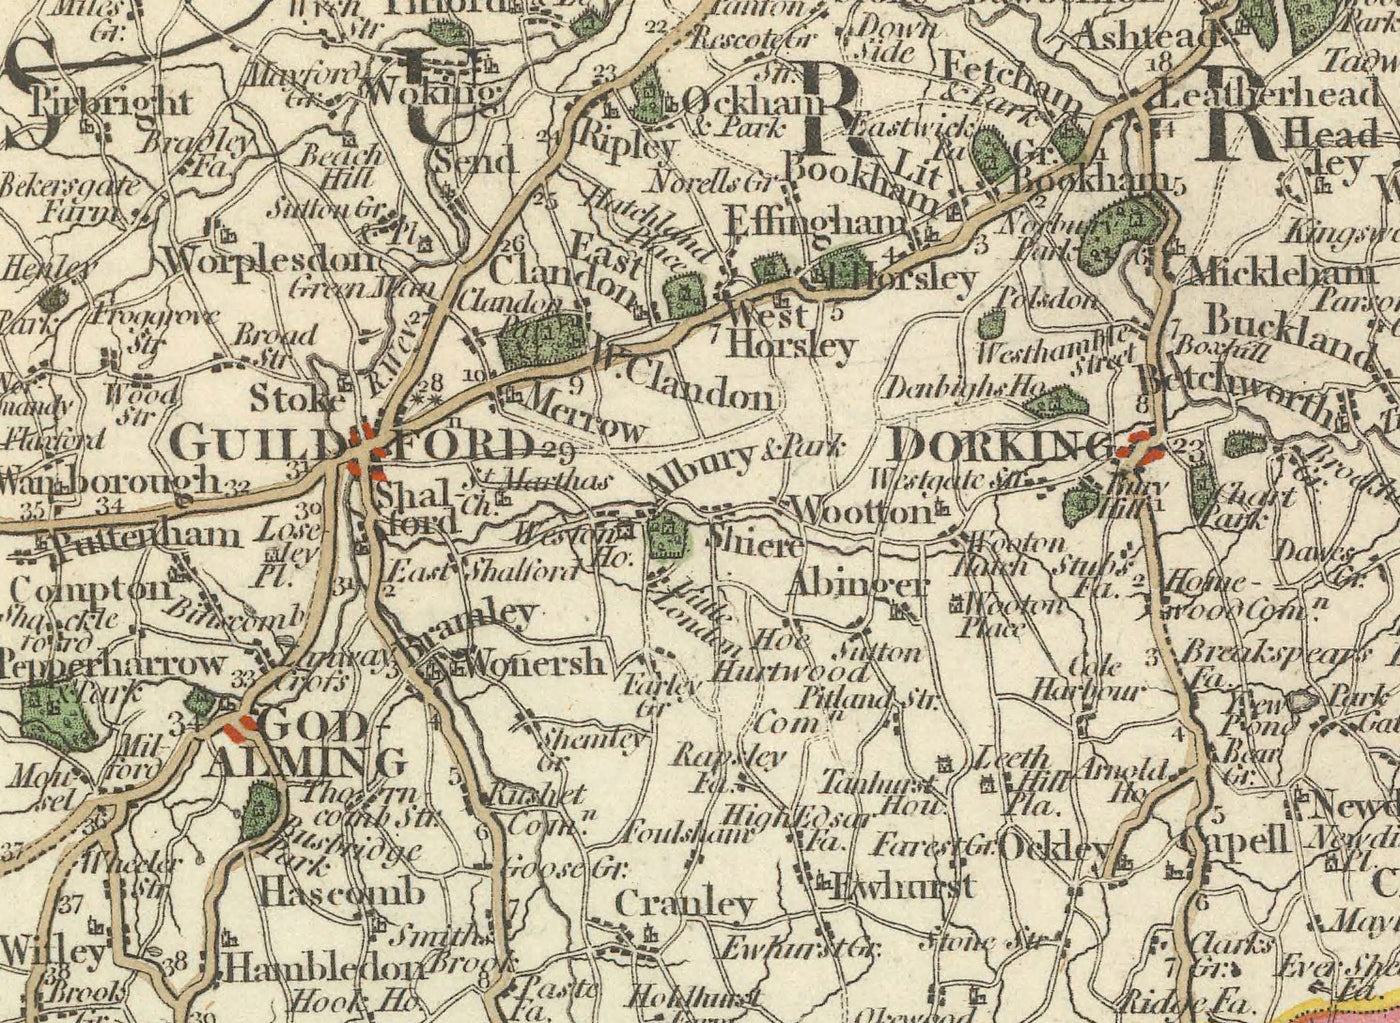 Old Map of Sussex & Surrey in 1794 by John Cary - Brighton, Dorking, Lewes, East Grinstead, Crawley